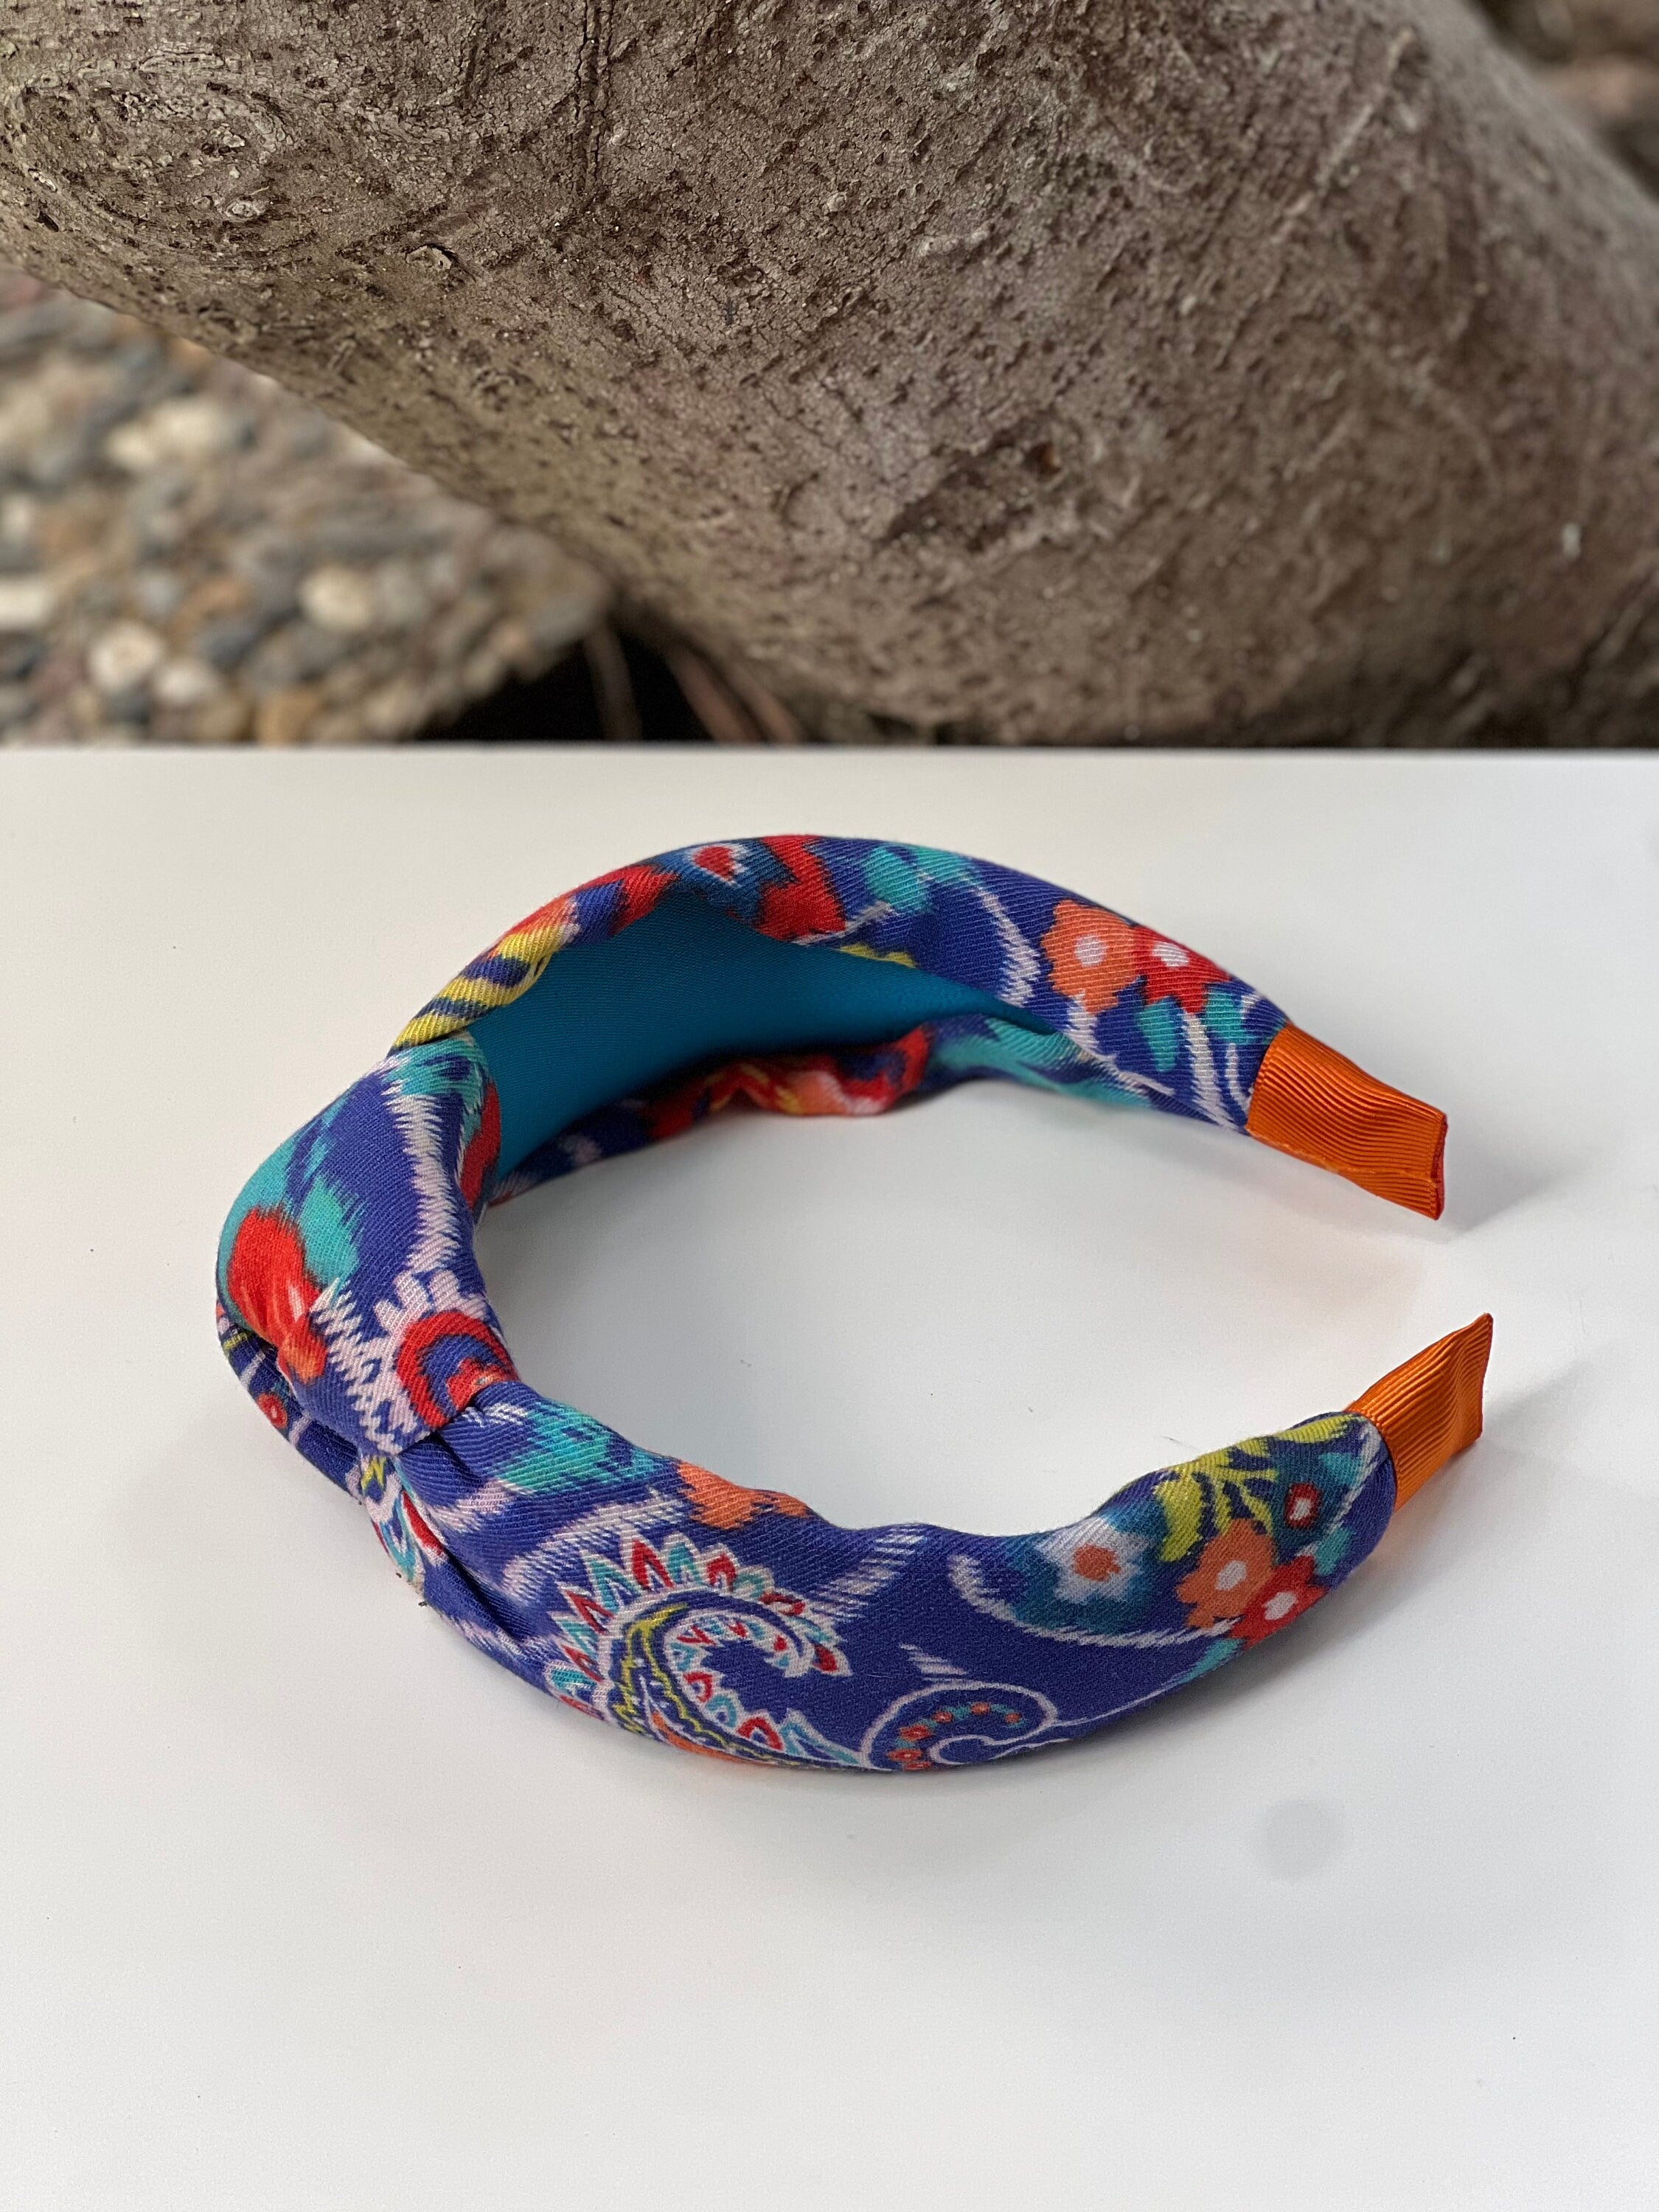 Knotted Headband with a bold and vibrant Ethnic Pattern - Adds personality to your everyday look.